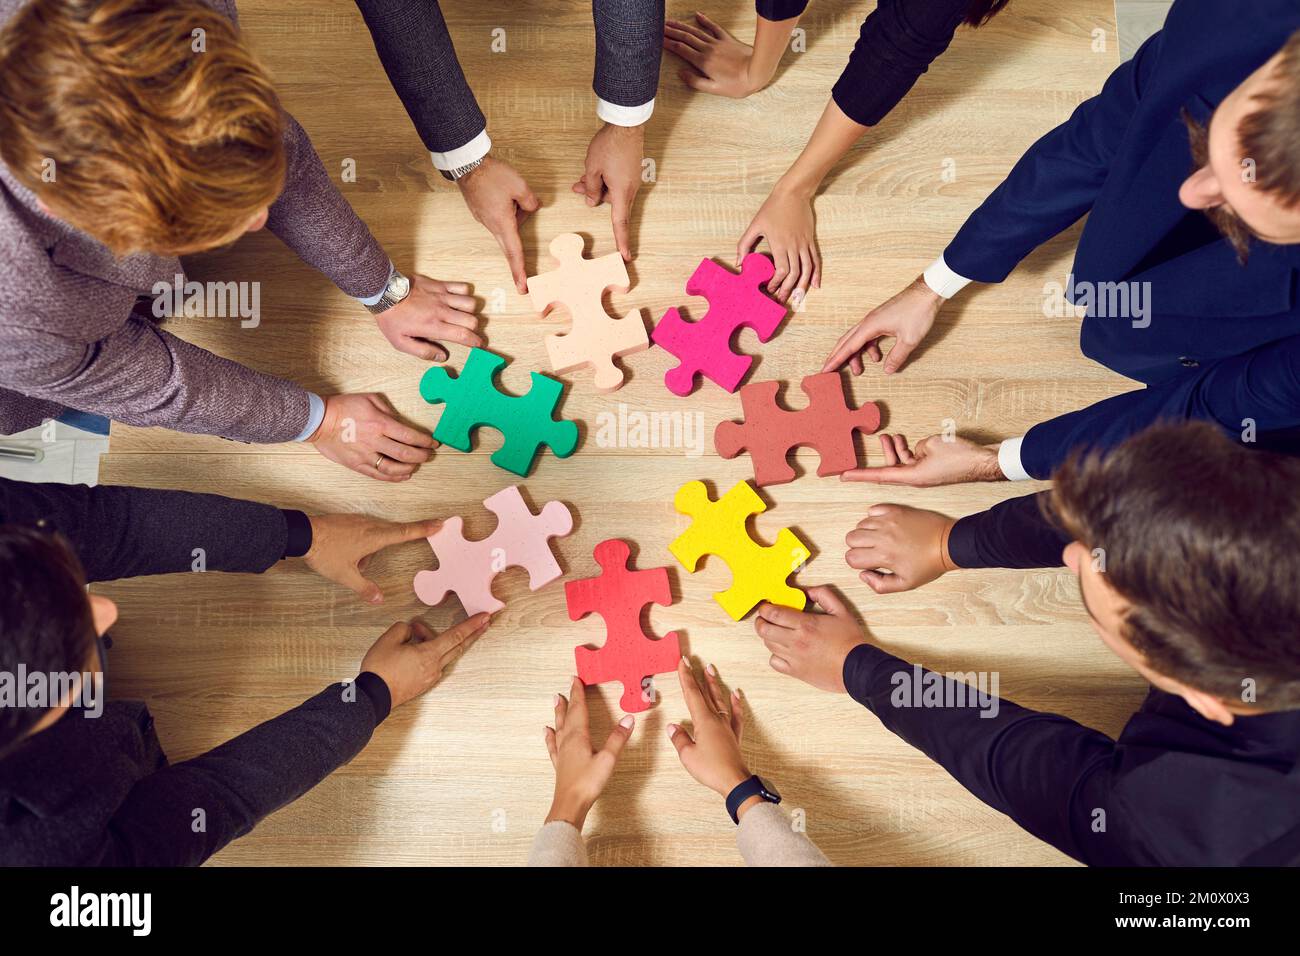 Colored puzzle pieces that business people connect together during team building. Stock Photo